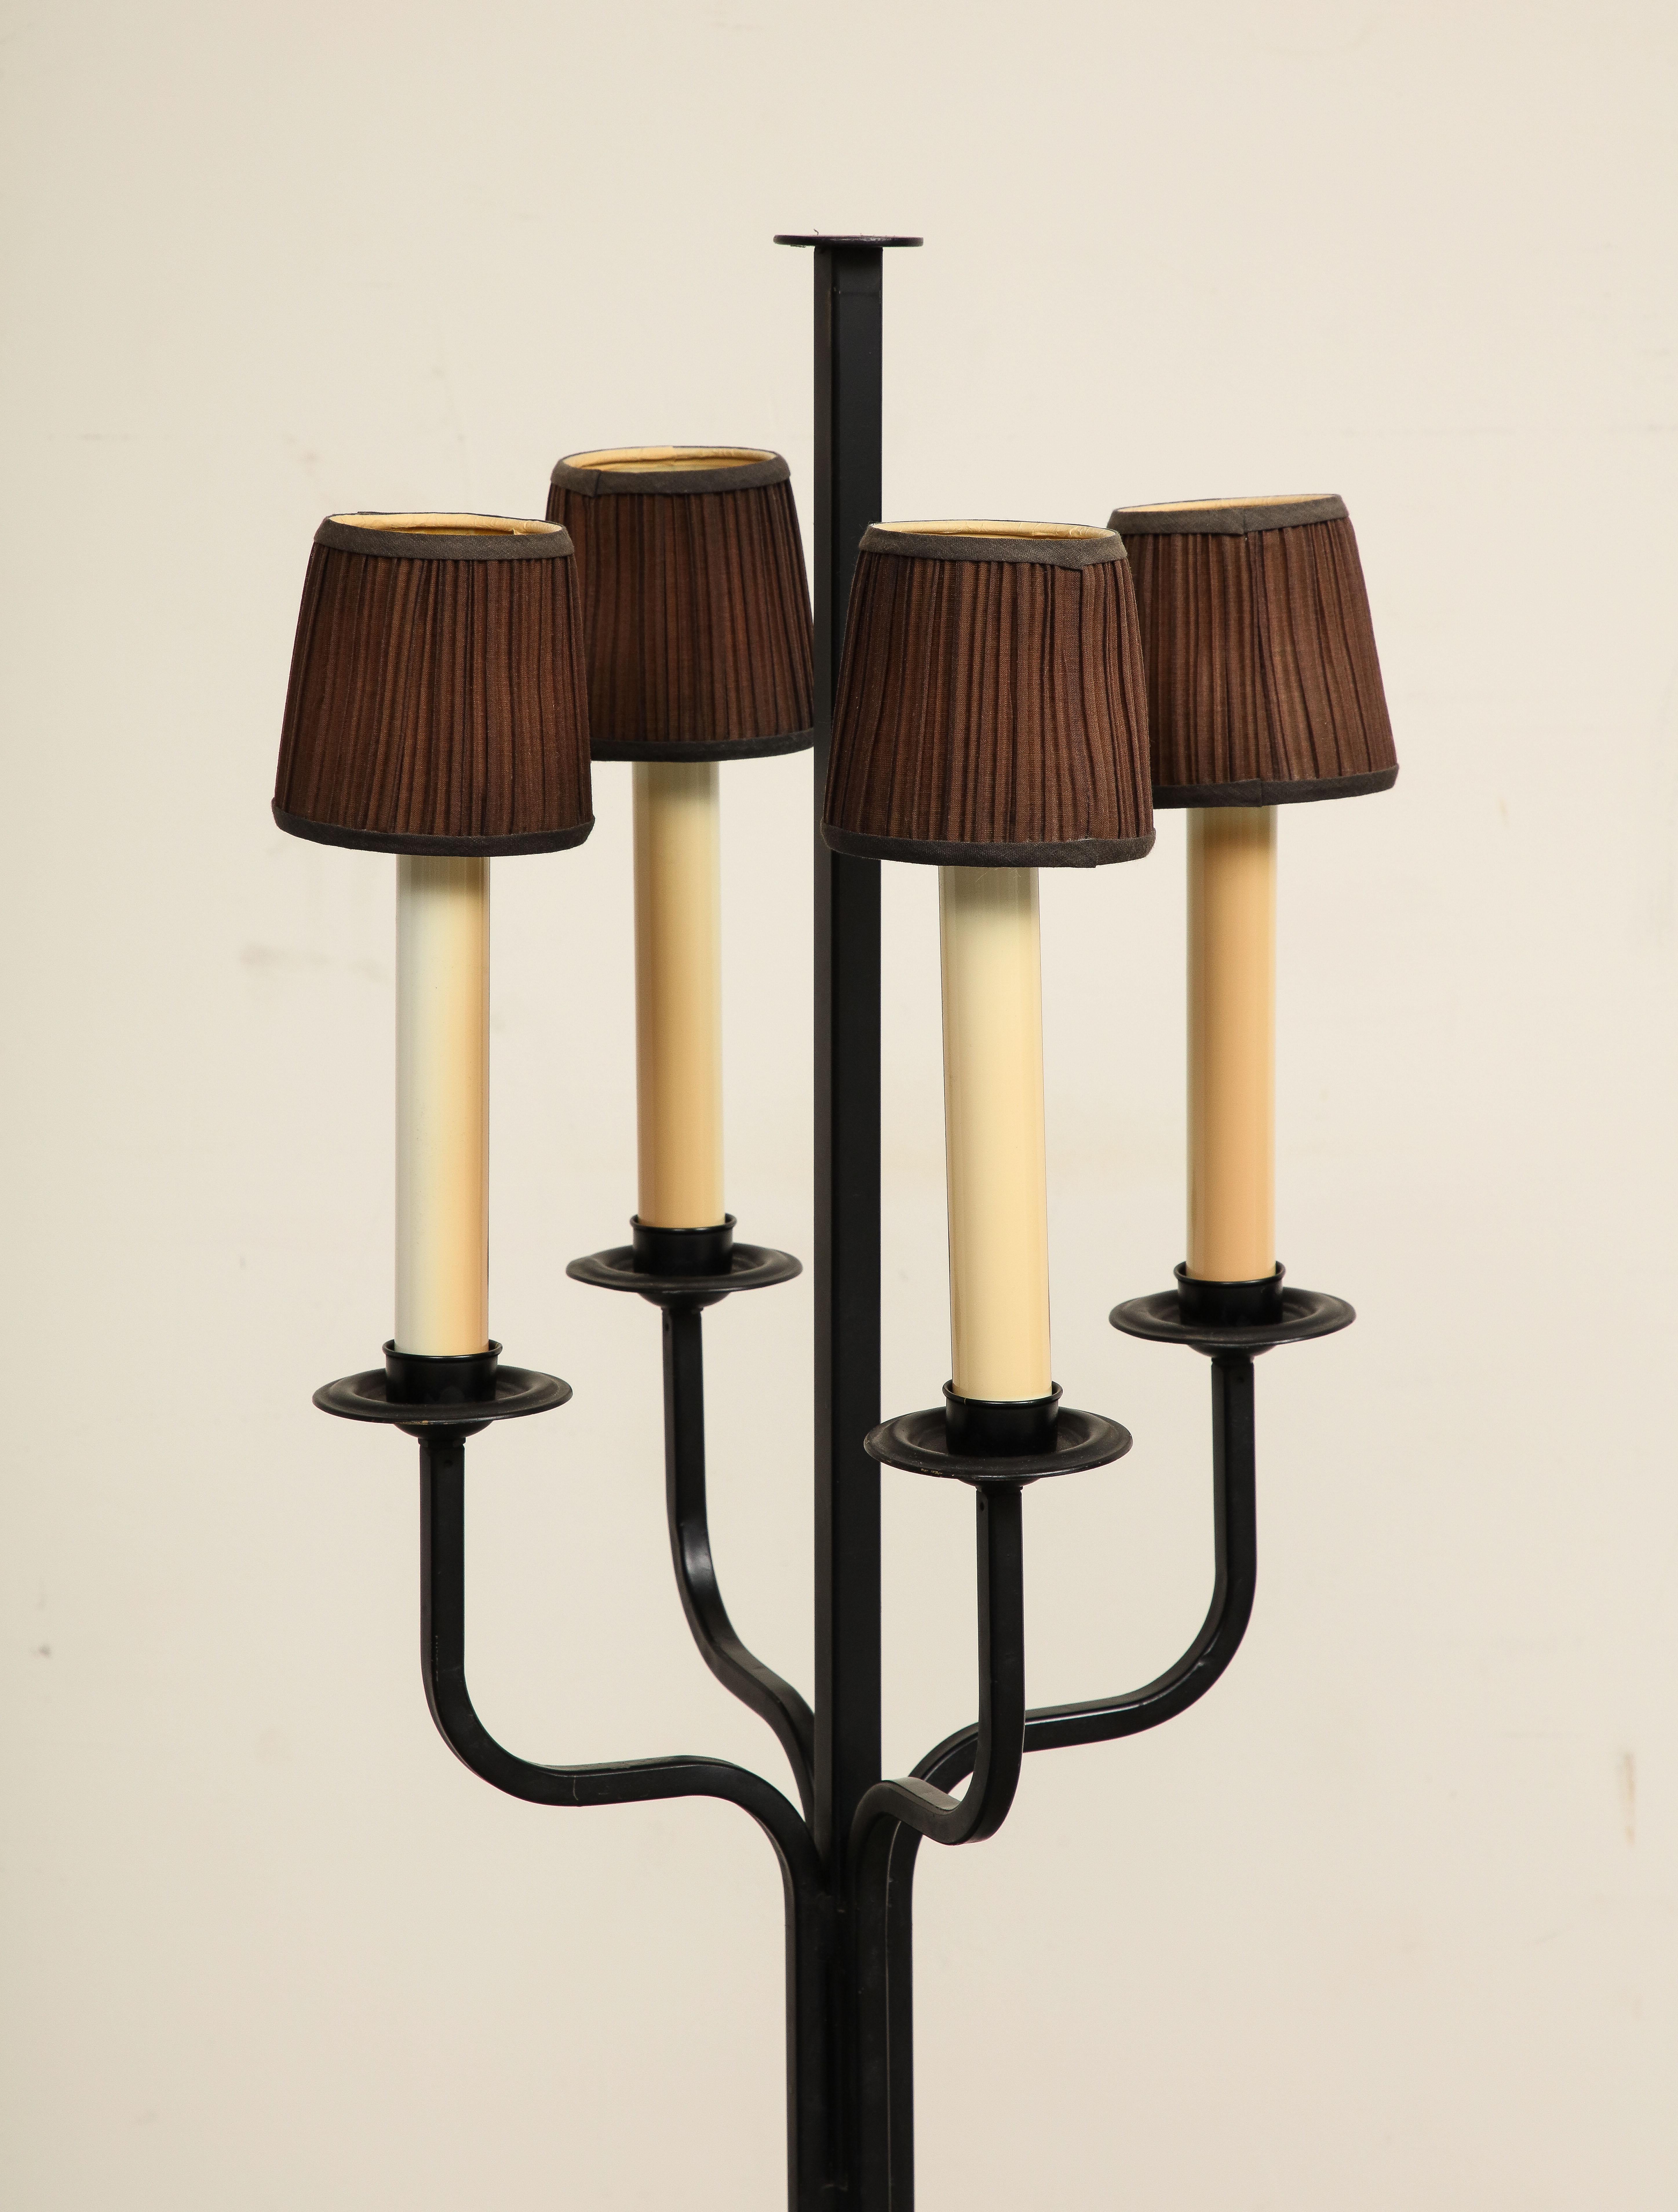 Midcentury Iron Candlestick Floor Lamp, attributed to Tommi Parzinger For Sale 2